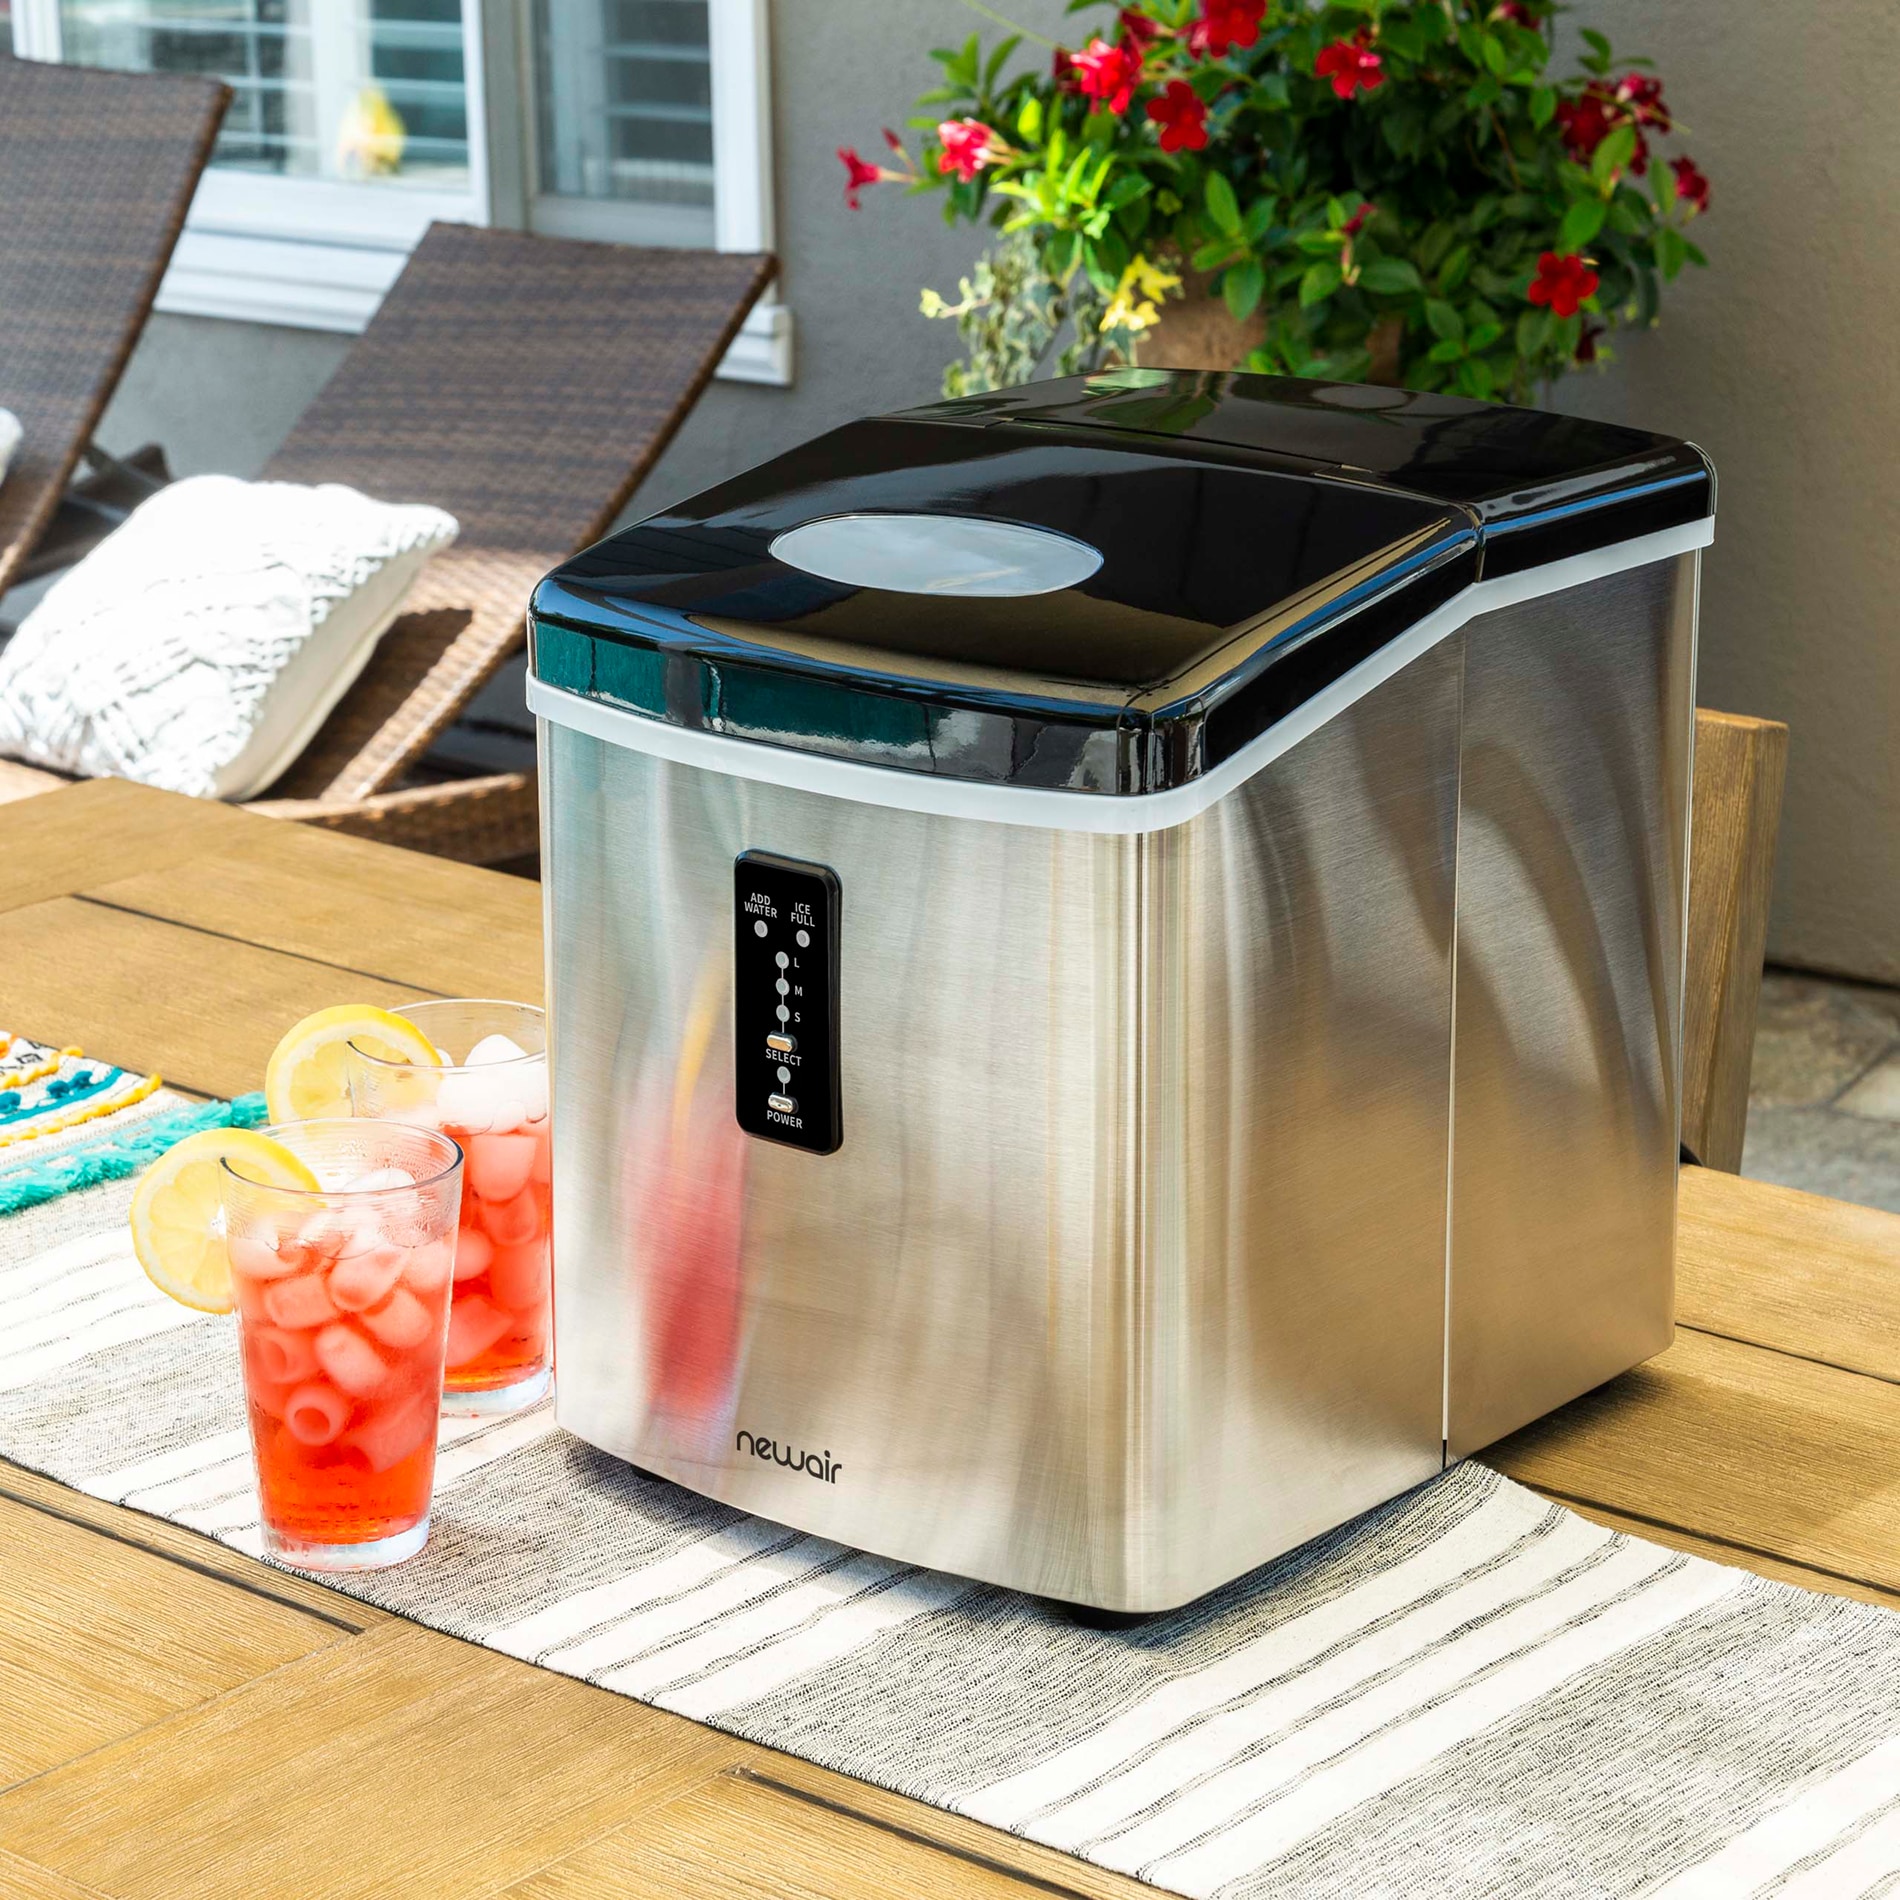 Portable Ice Makers for sale in Tulsa, Oklahoma